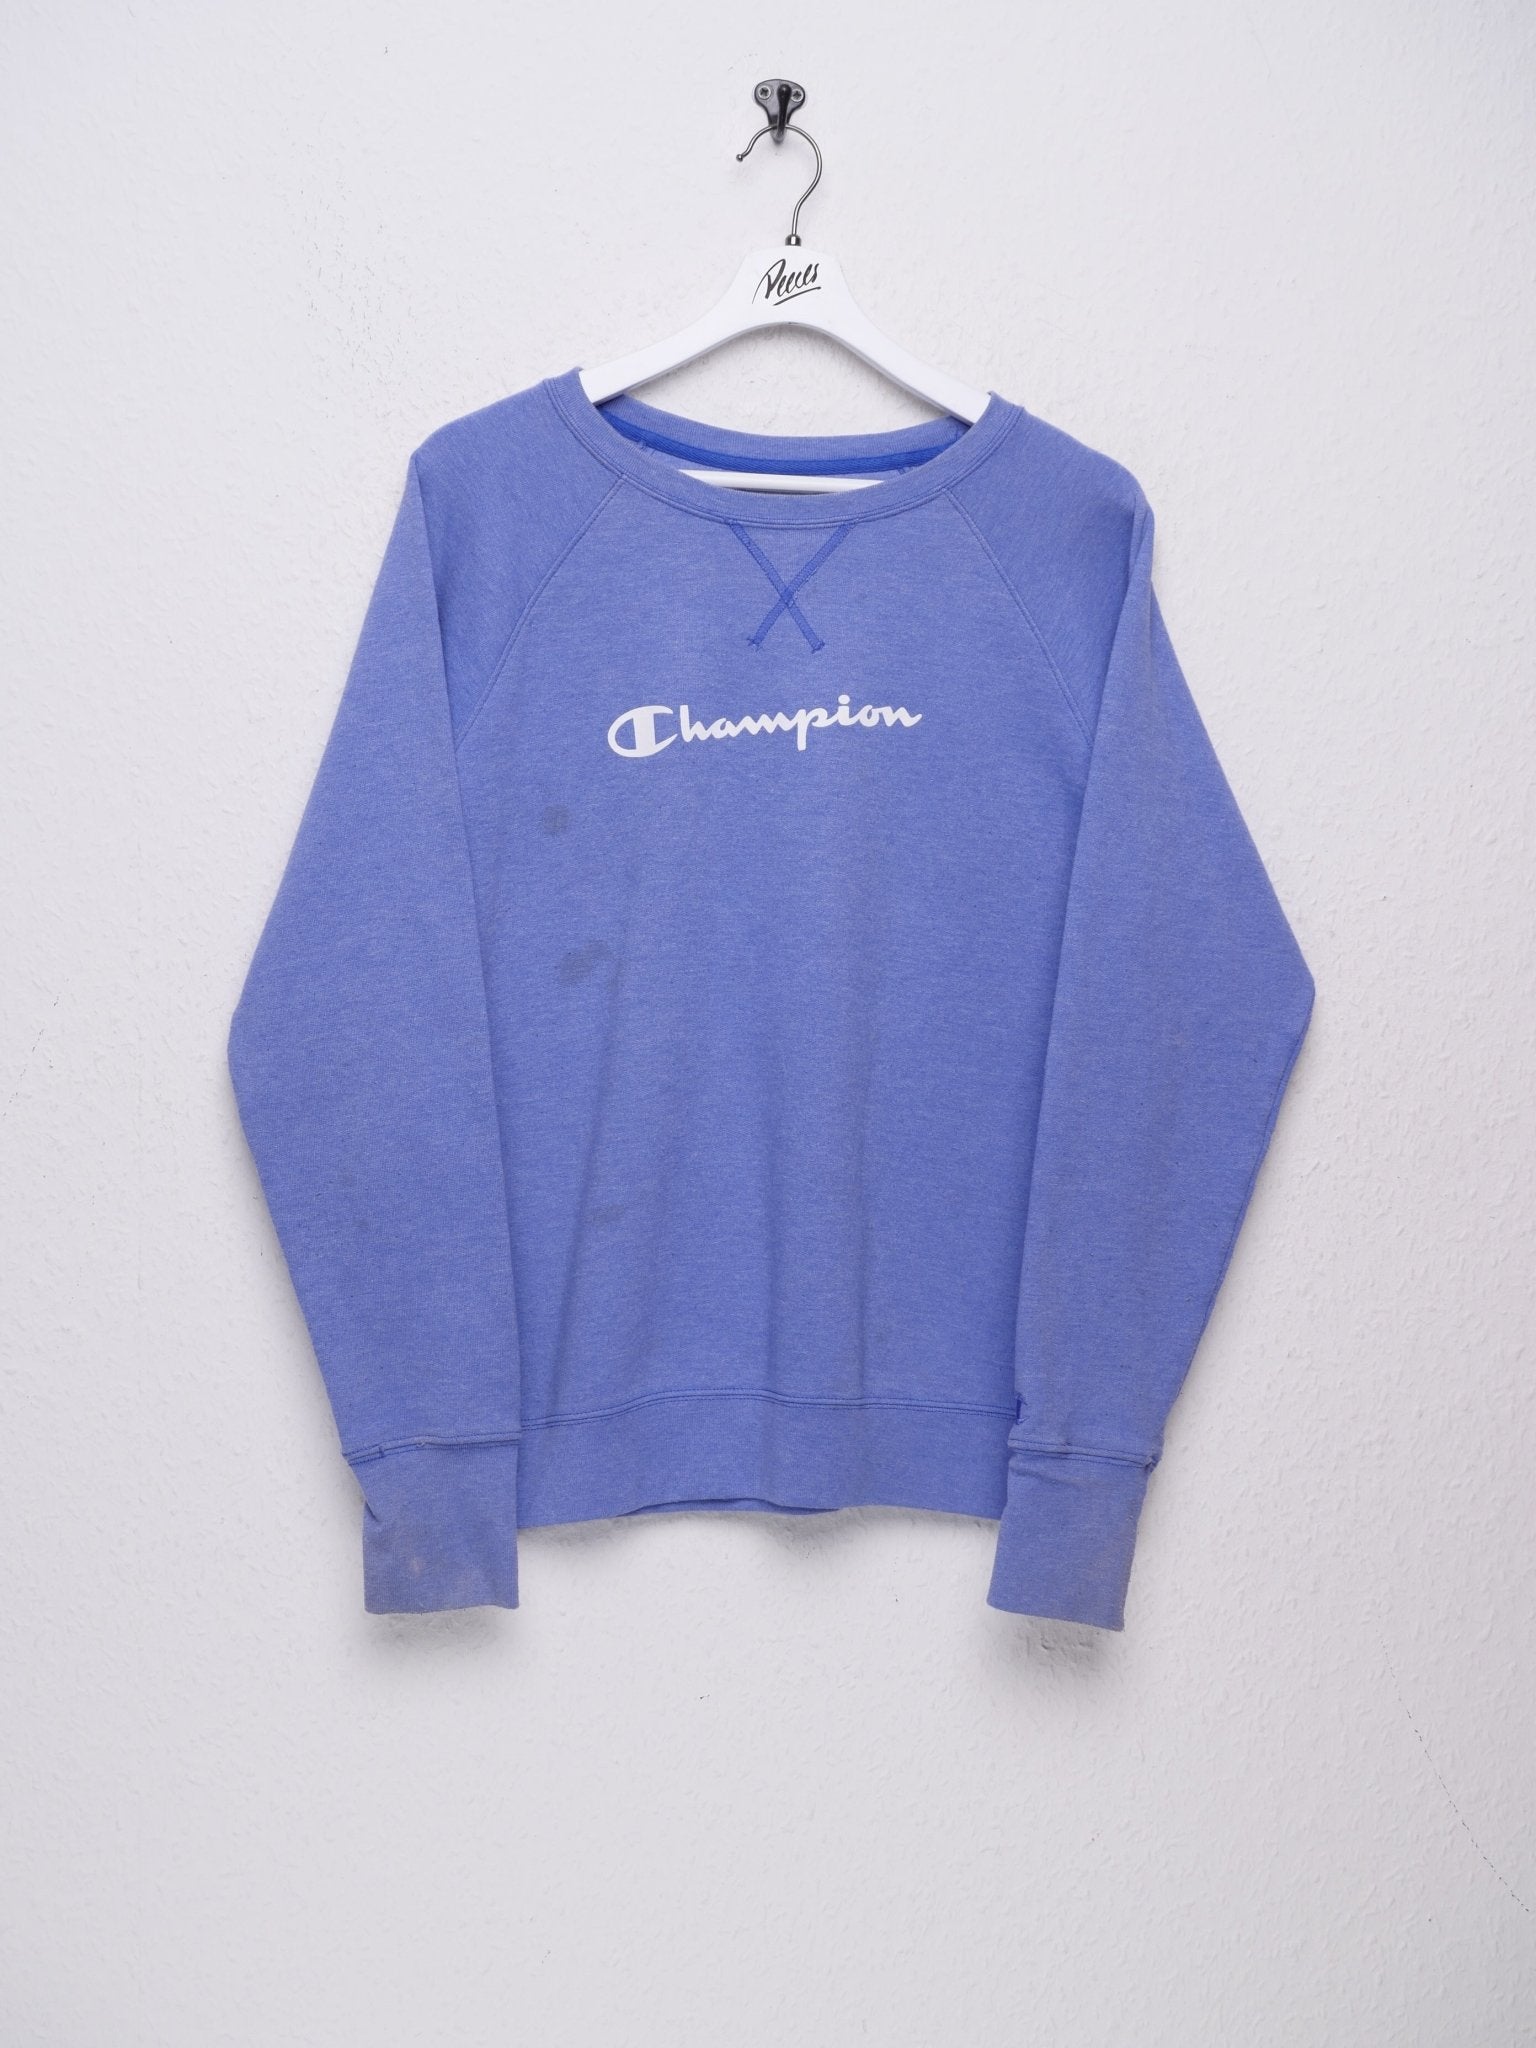 Champion embroidered Logo blue Sweater - Peeces